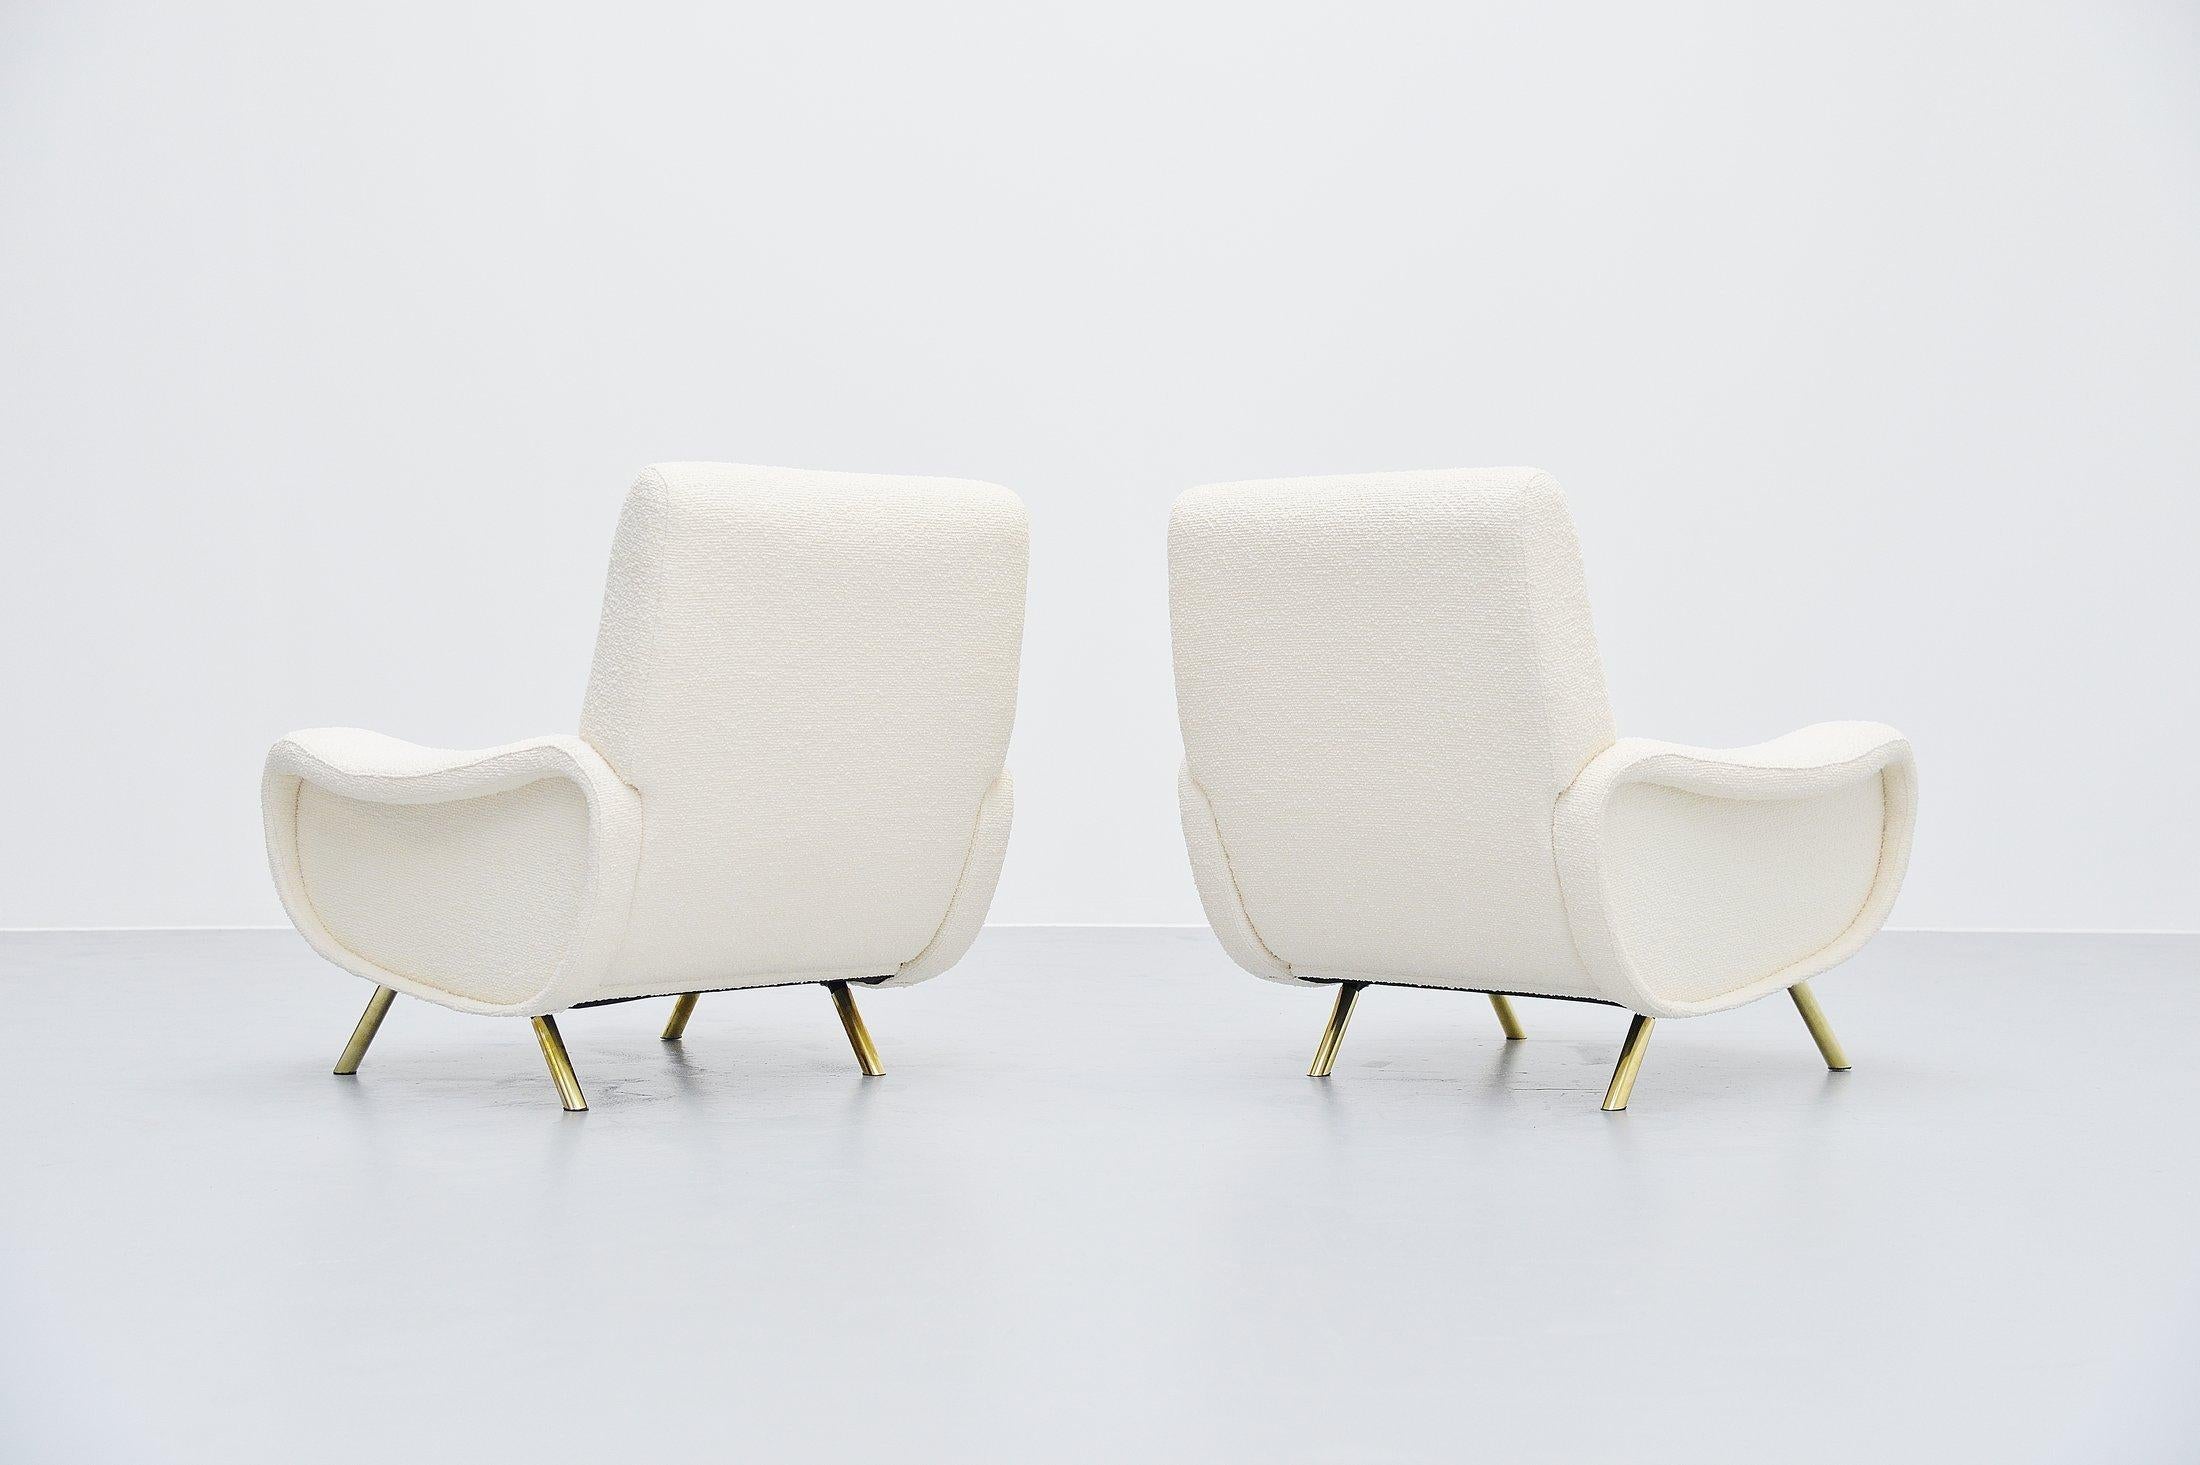 Iconic so called pair of 'Lady chairs' designed by Marco Zanuso and manufactured by Arflex, Italy, 1951. These lady chairs have brass covered legs and they are newly upholstered in boucle fabric from Pierre Frey. The upholstery looks amazing on